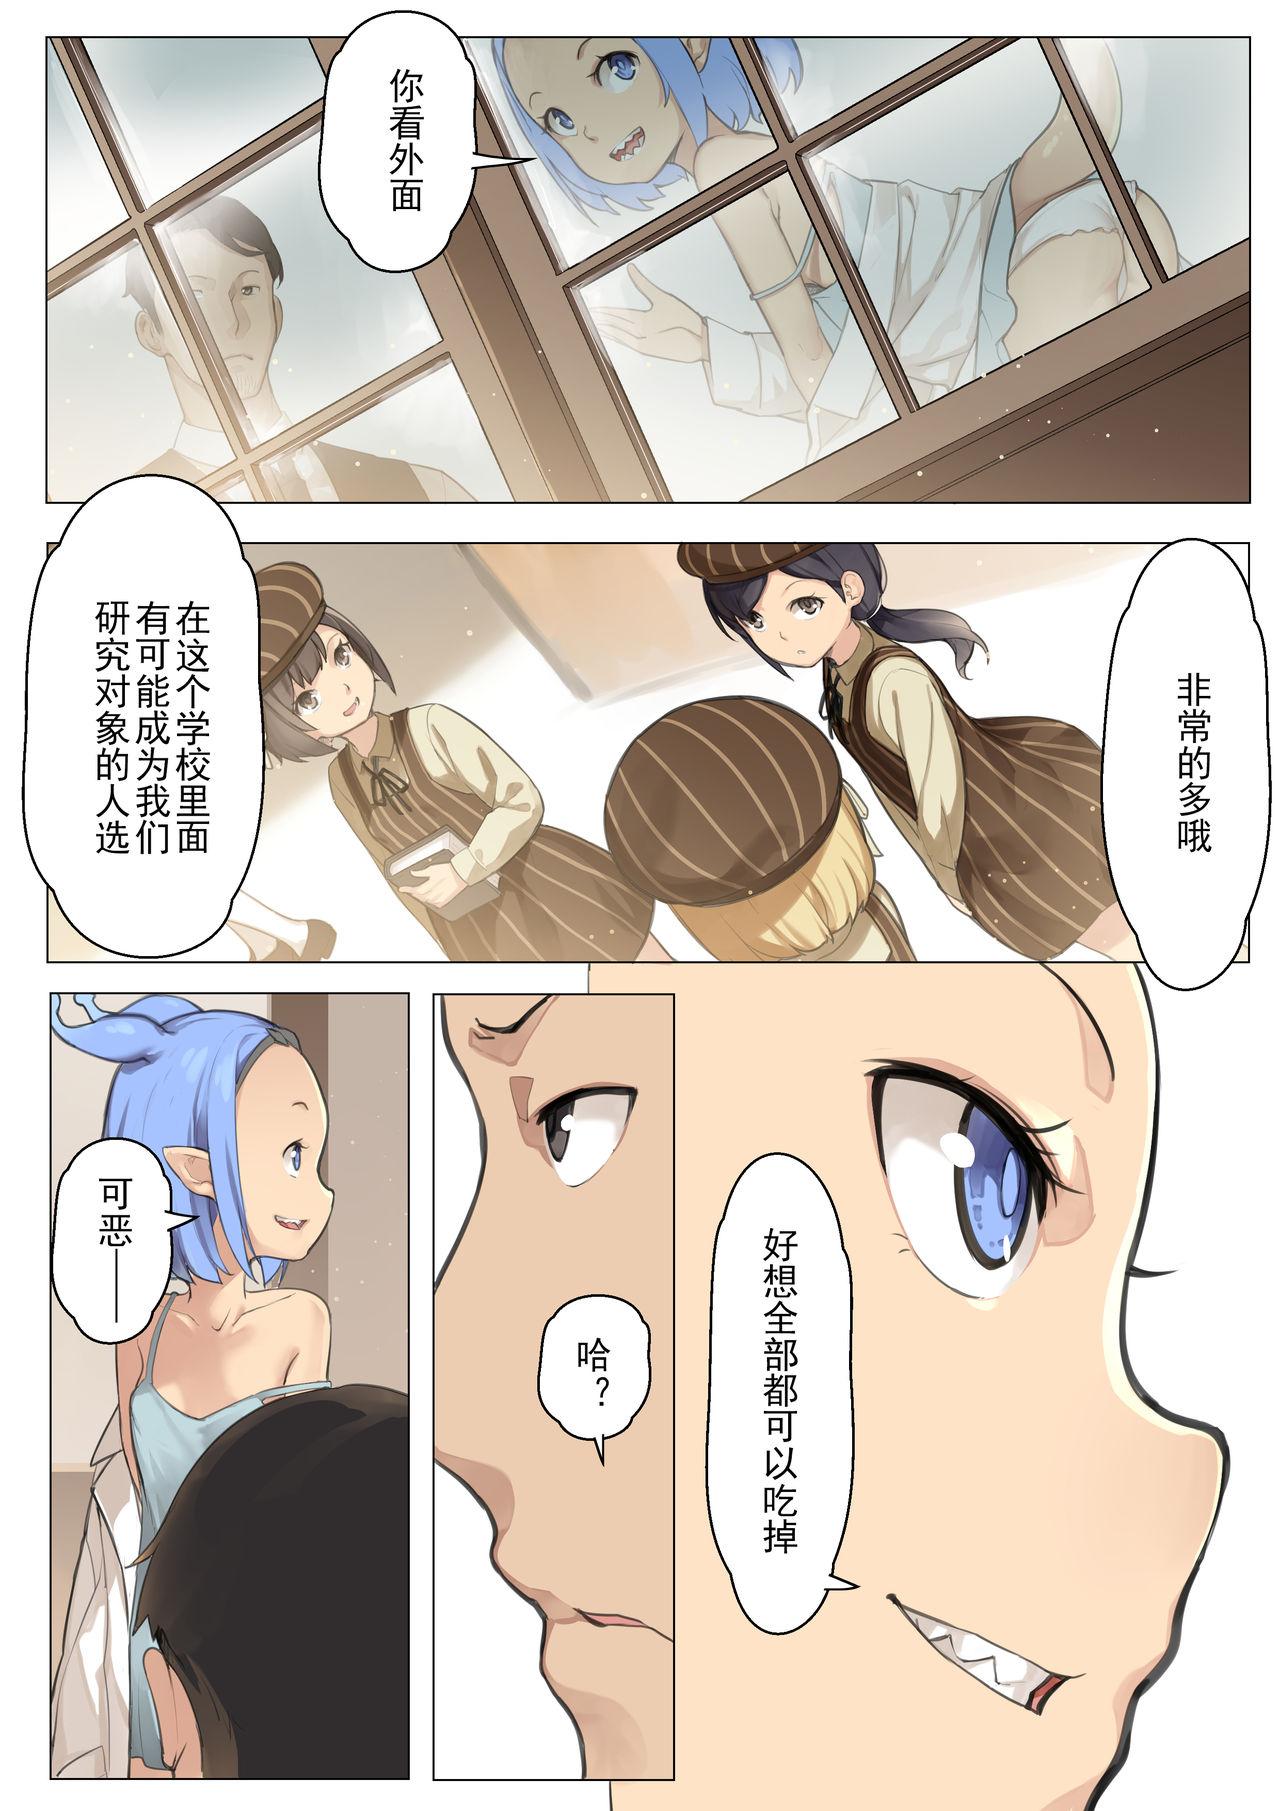 From (同人誌) [BLVEFO9] 乙女の特異性 - 第03話 (オリジナル)[Chinese]【不可视汉化】 - Original Picked Up - Page 11